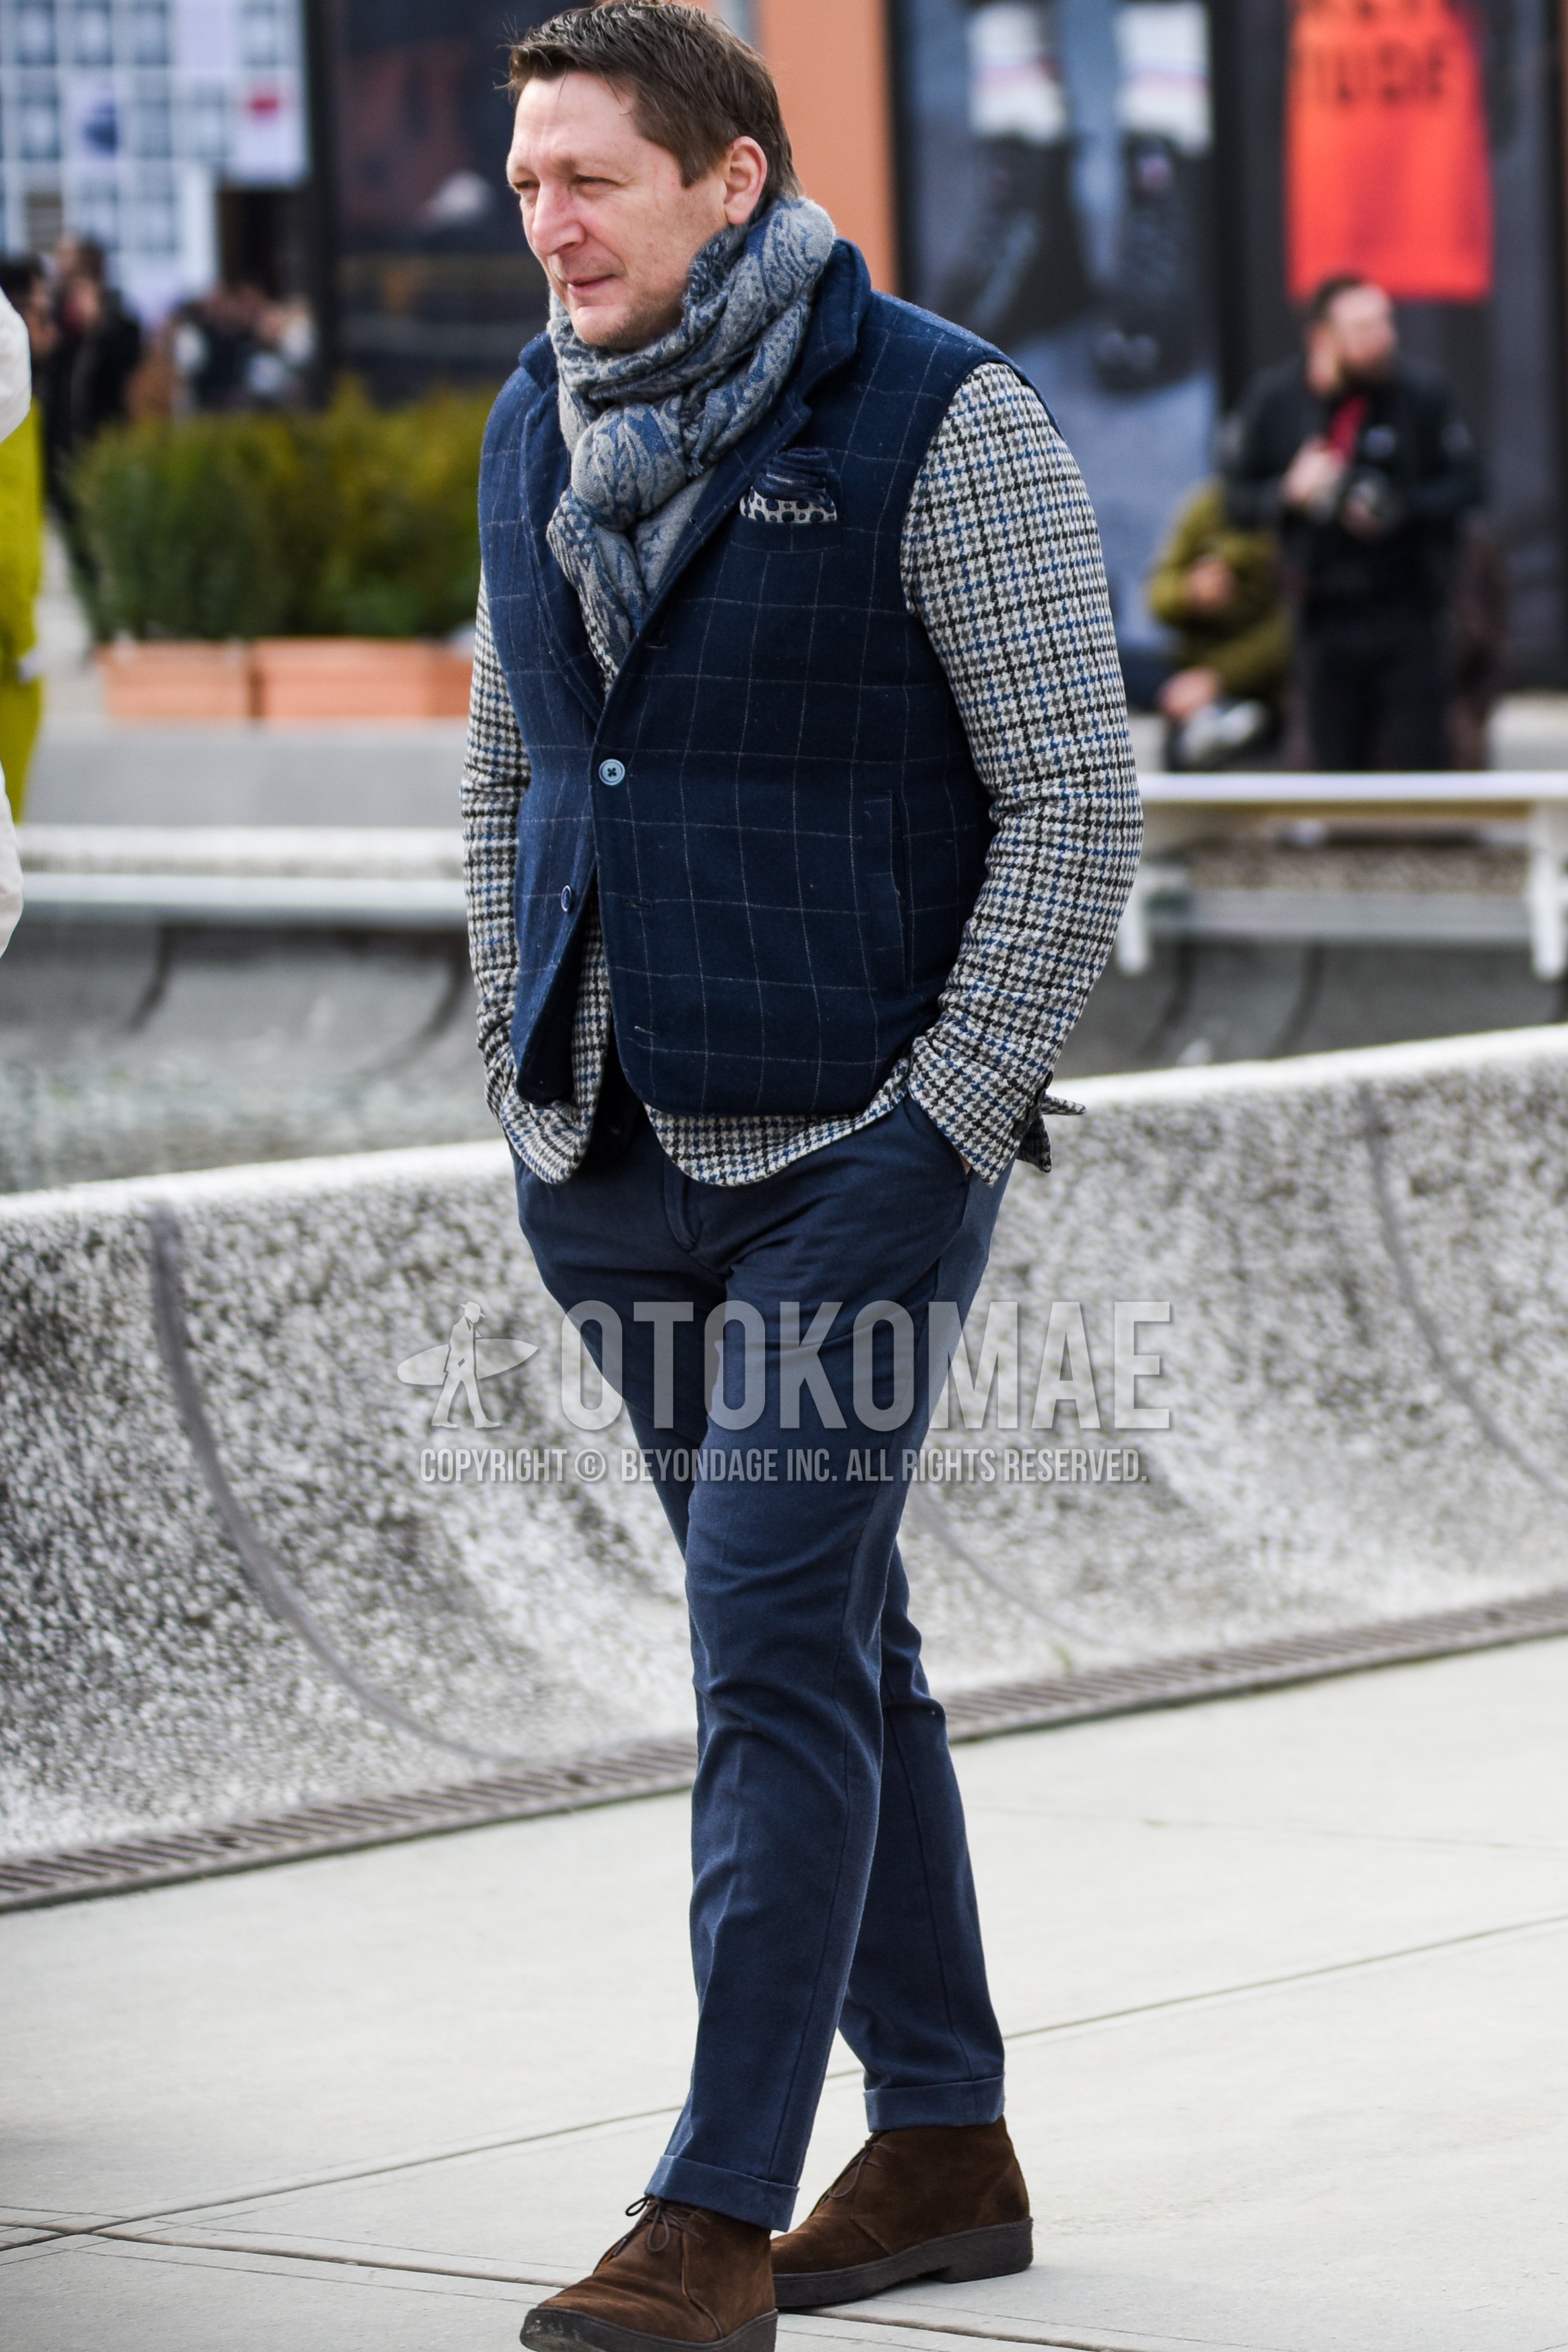 Men's autumn winter outfit with navy scarf scarf, navy check down jacket, navy check casual vest, beige check tailored jacket, navy plain chinos, brown chukka boots.